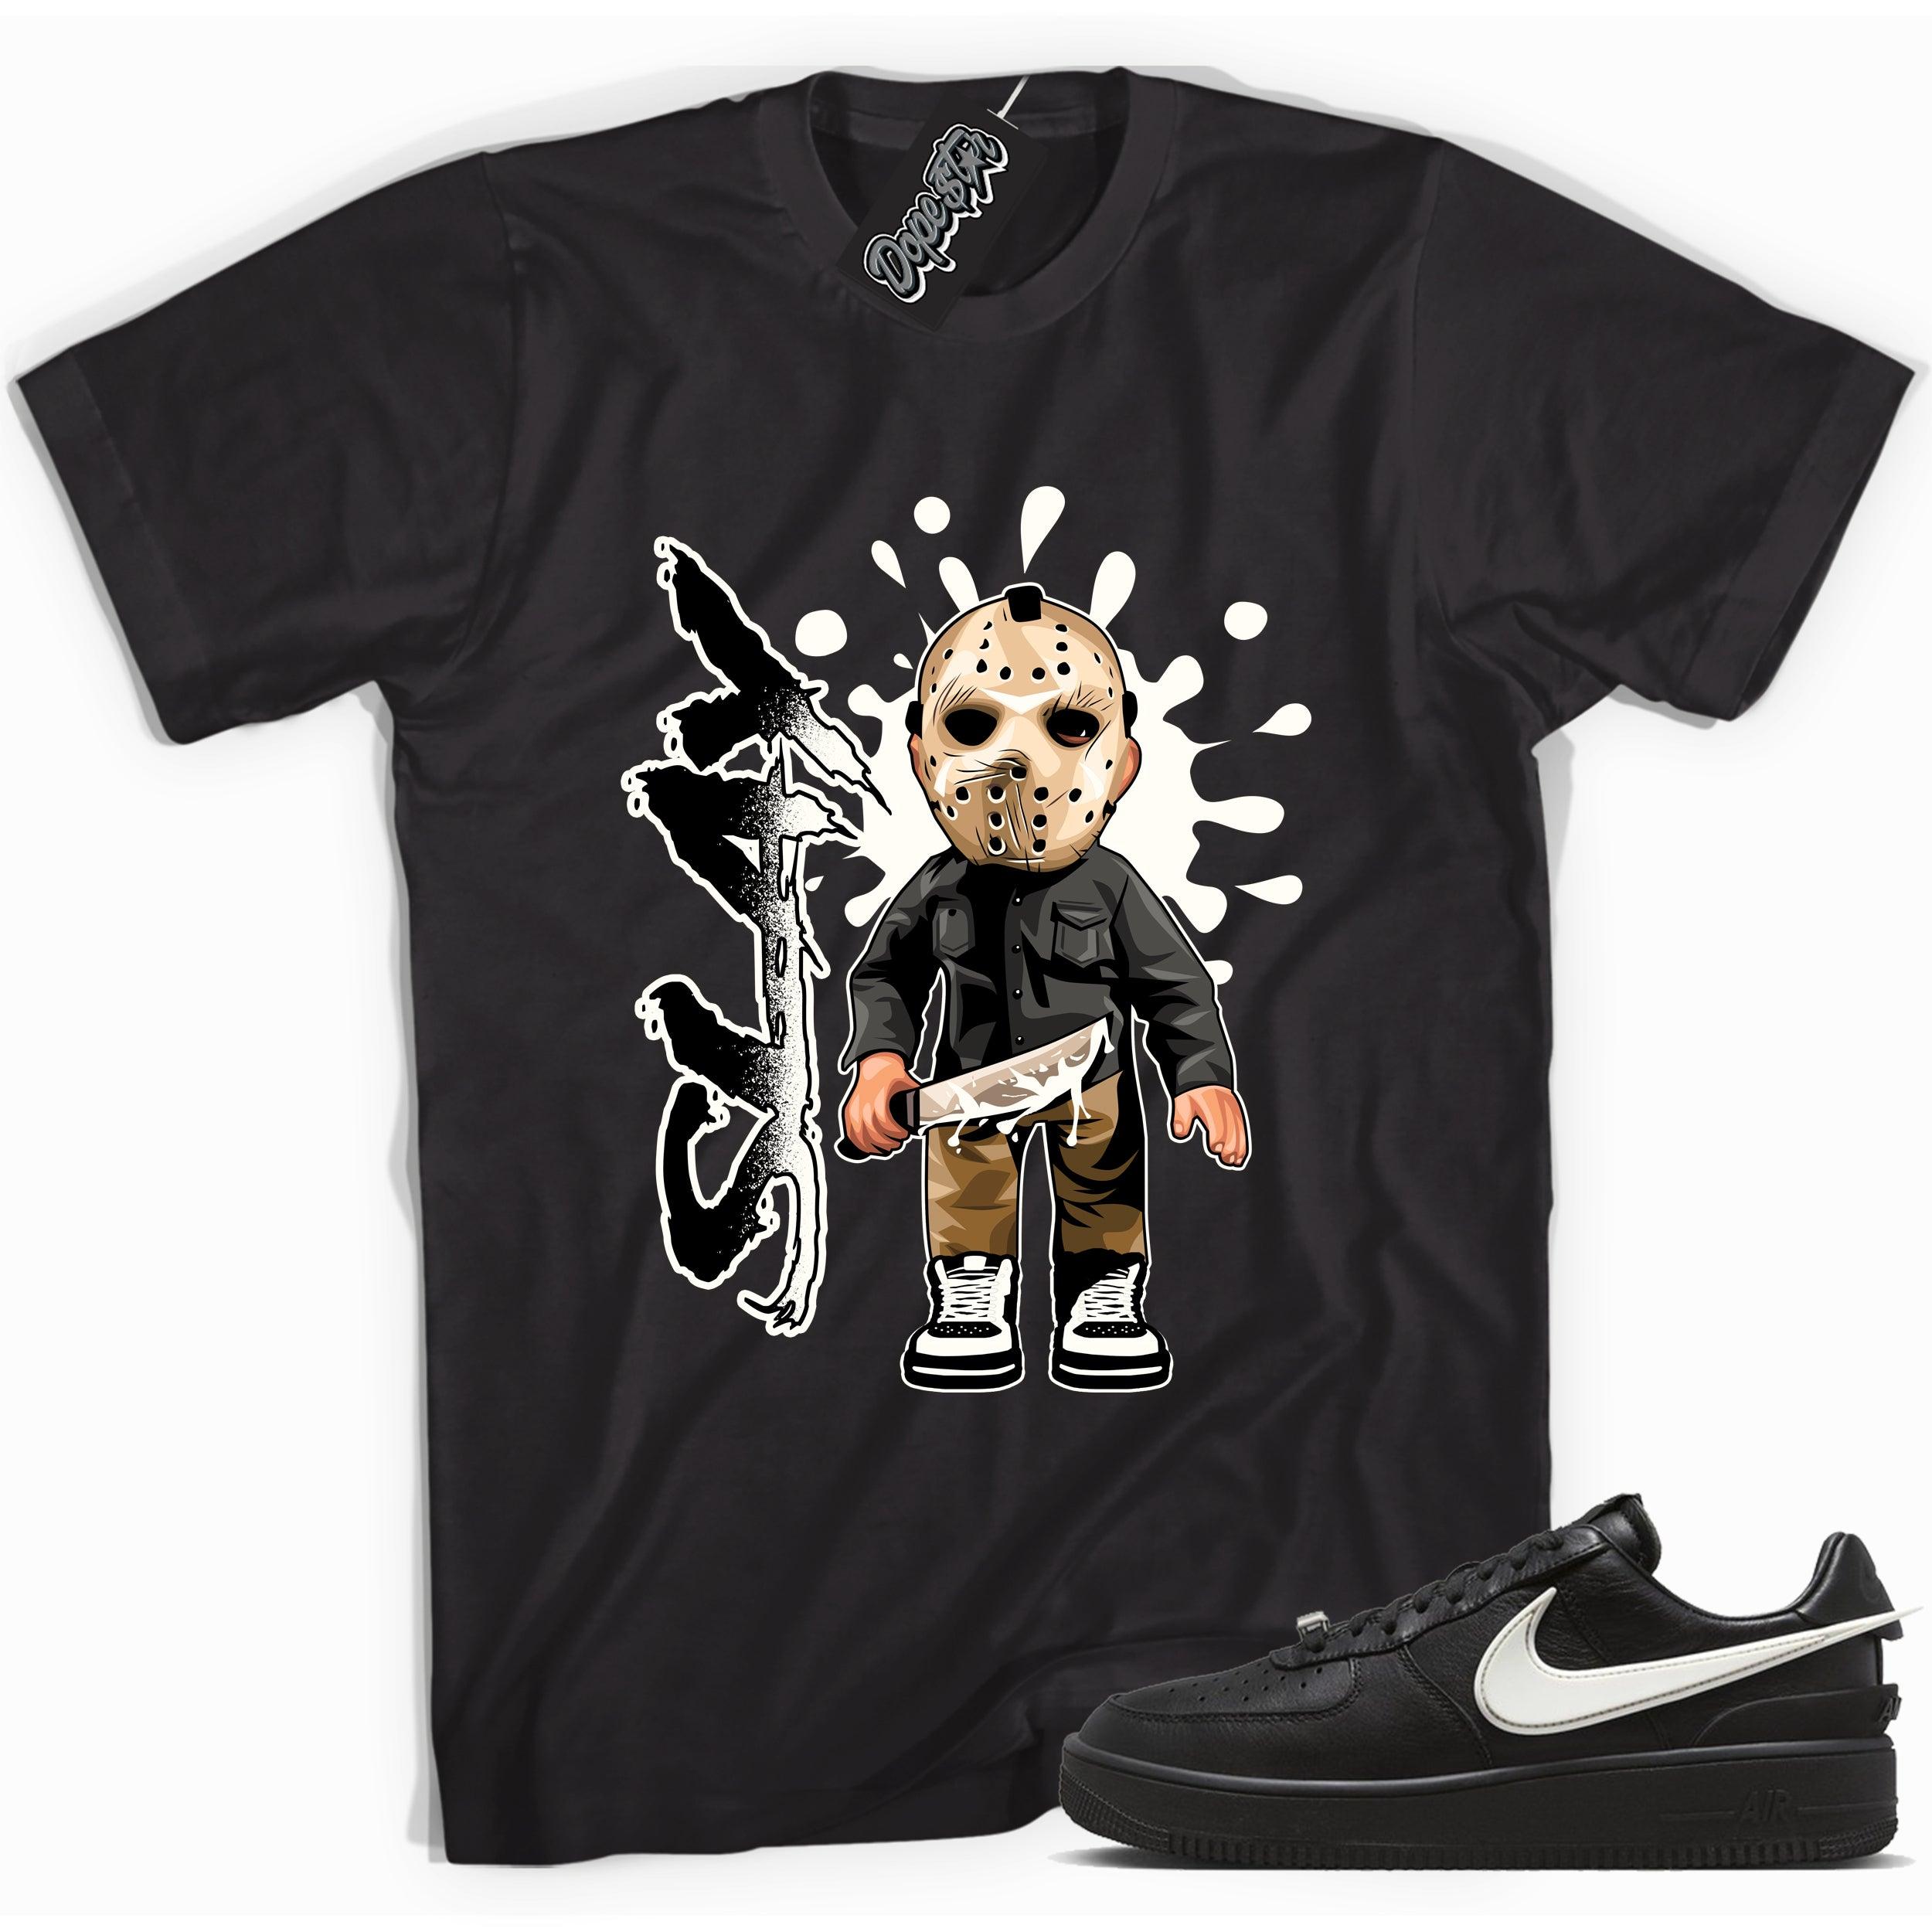 Cool black graphic tee with 'slay' print, that perfectly matches Nike Air Force 1 Low SP Ambush Phantom sneakers.v